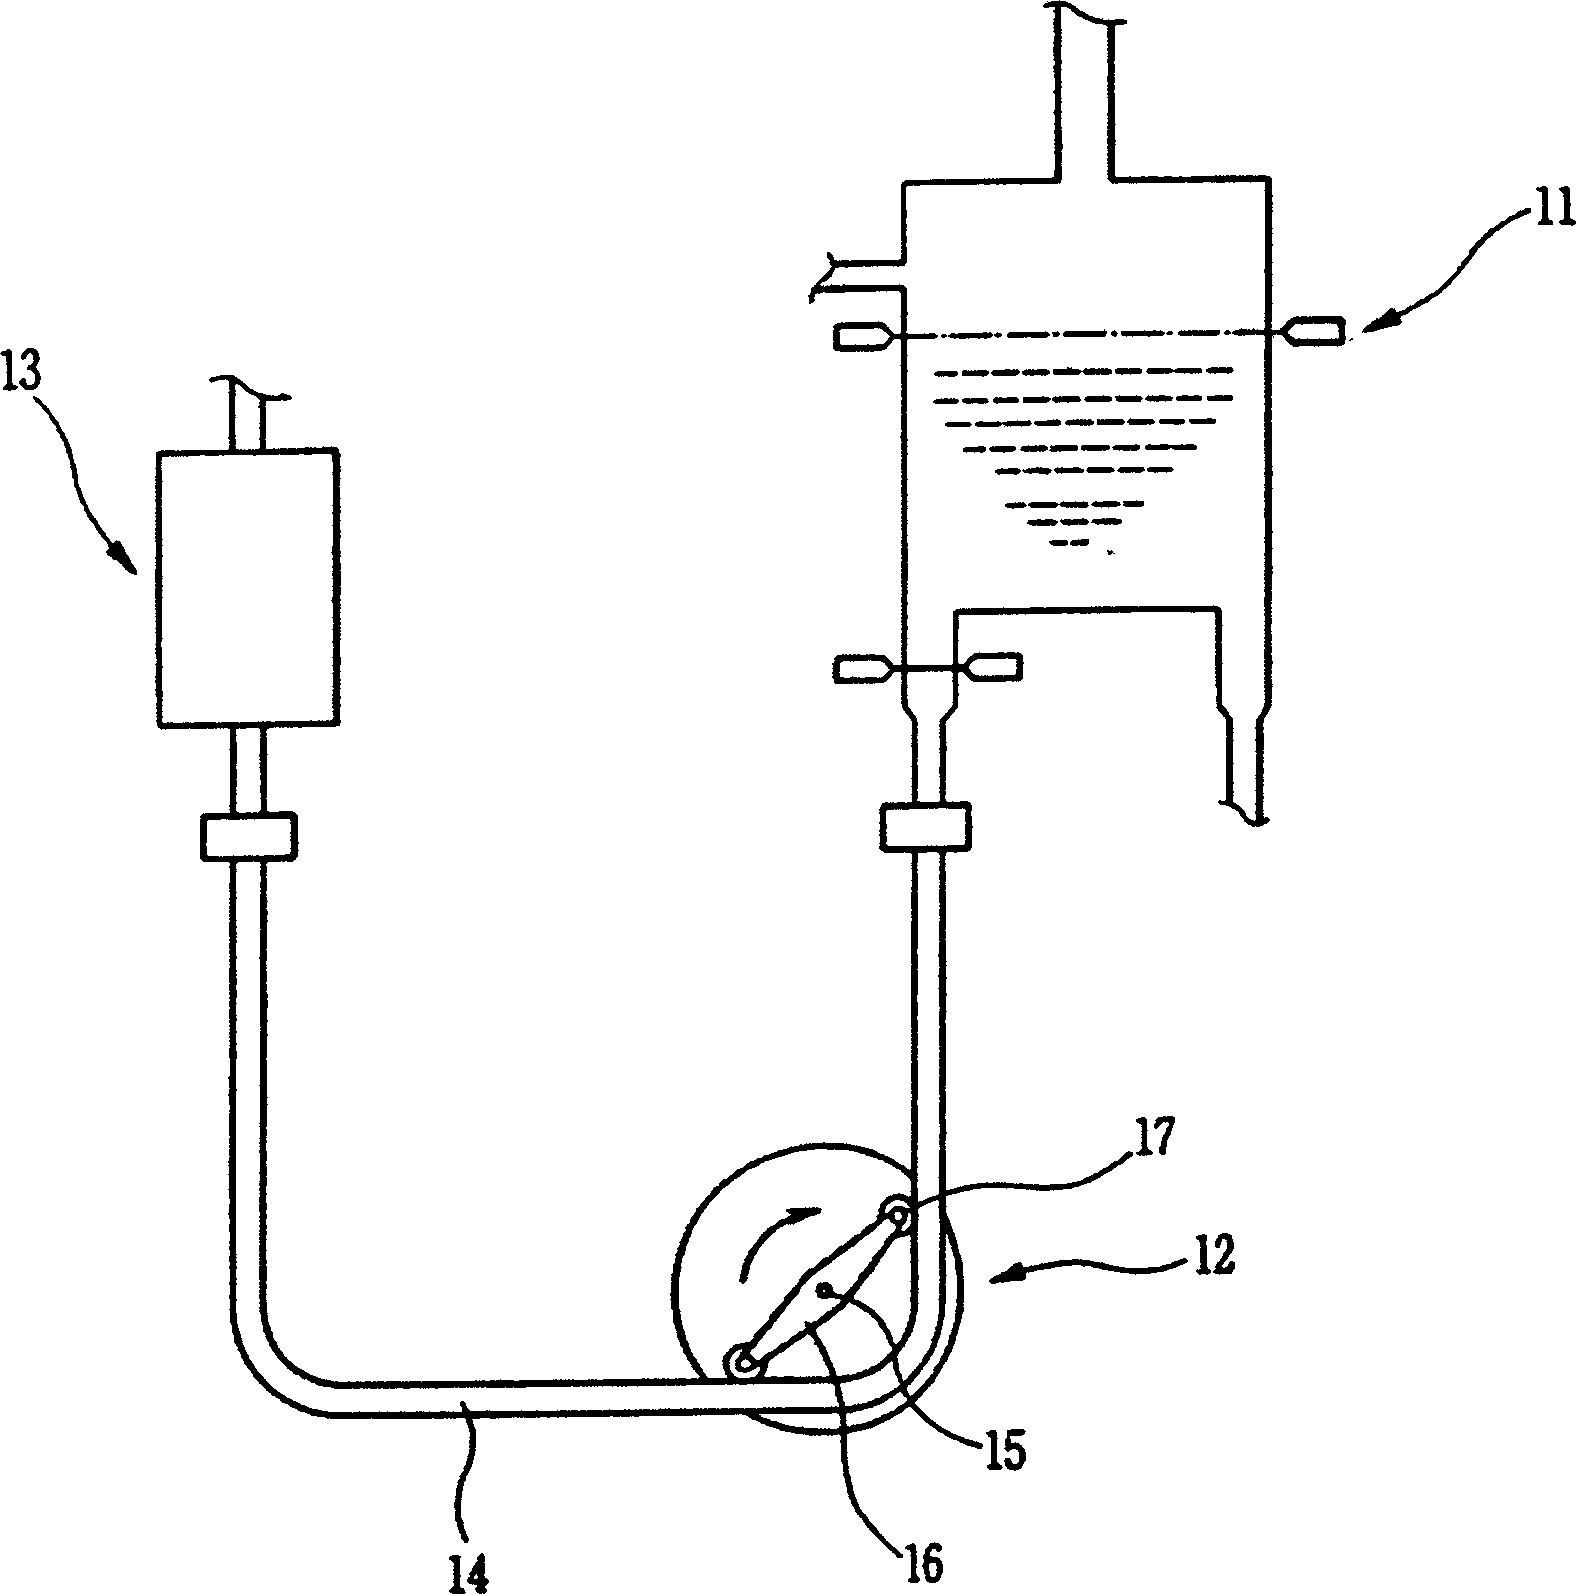 External heart-lung life-supporting system with two beating pump